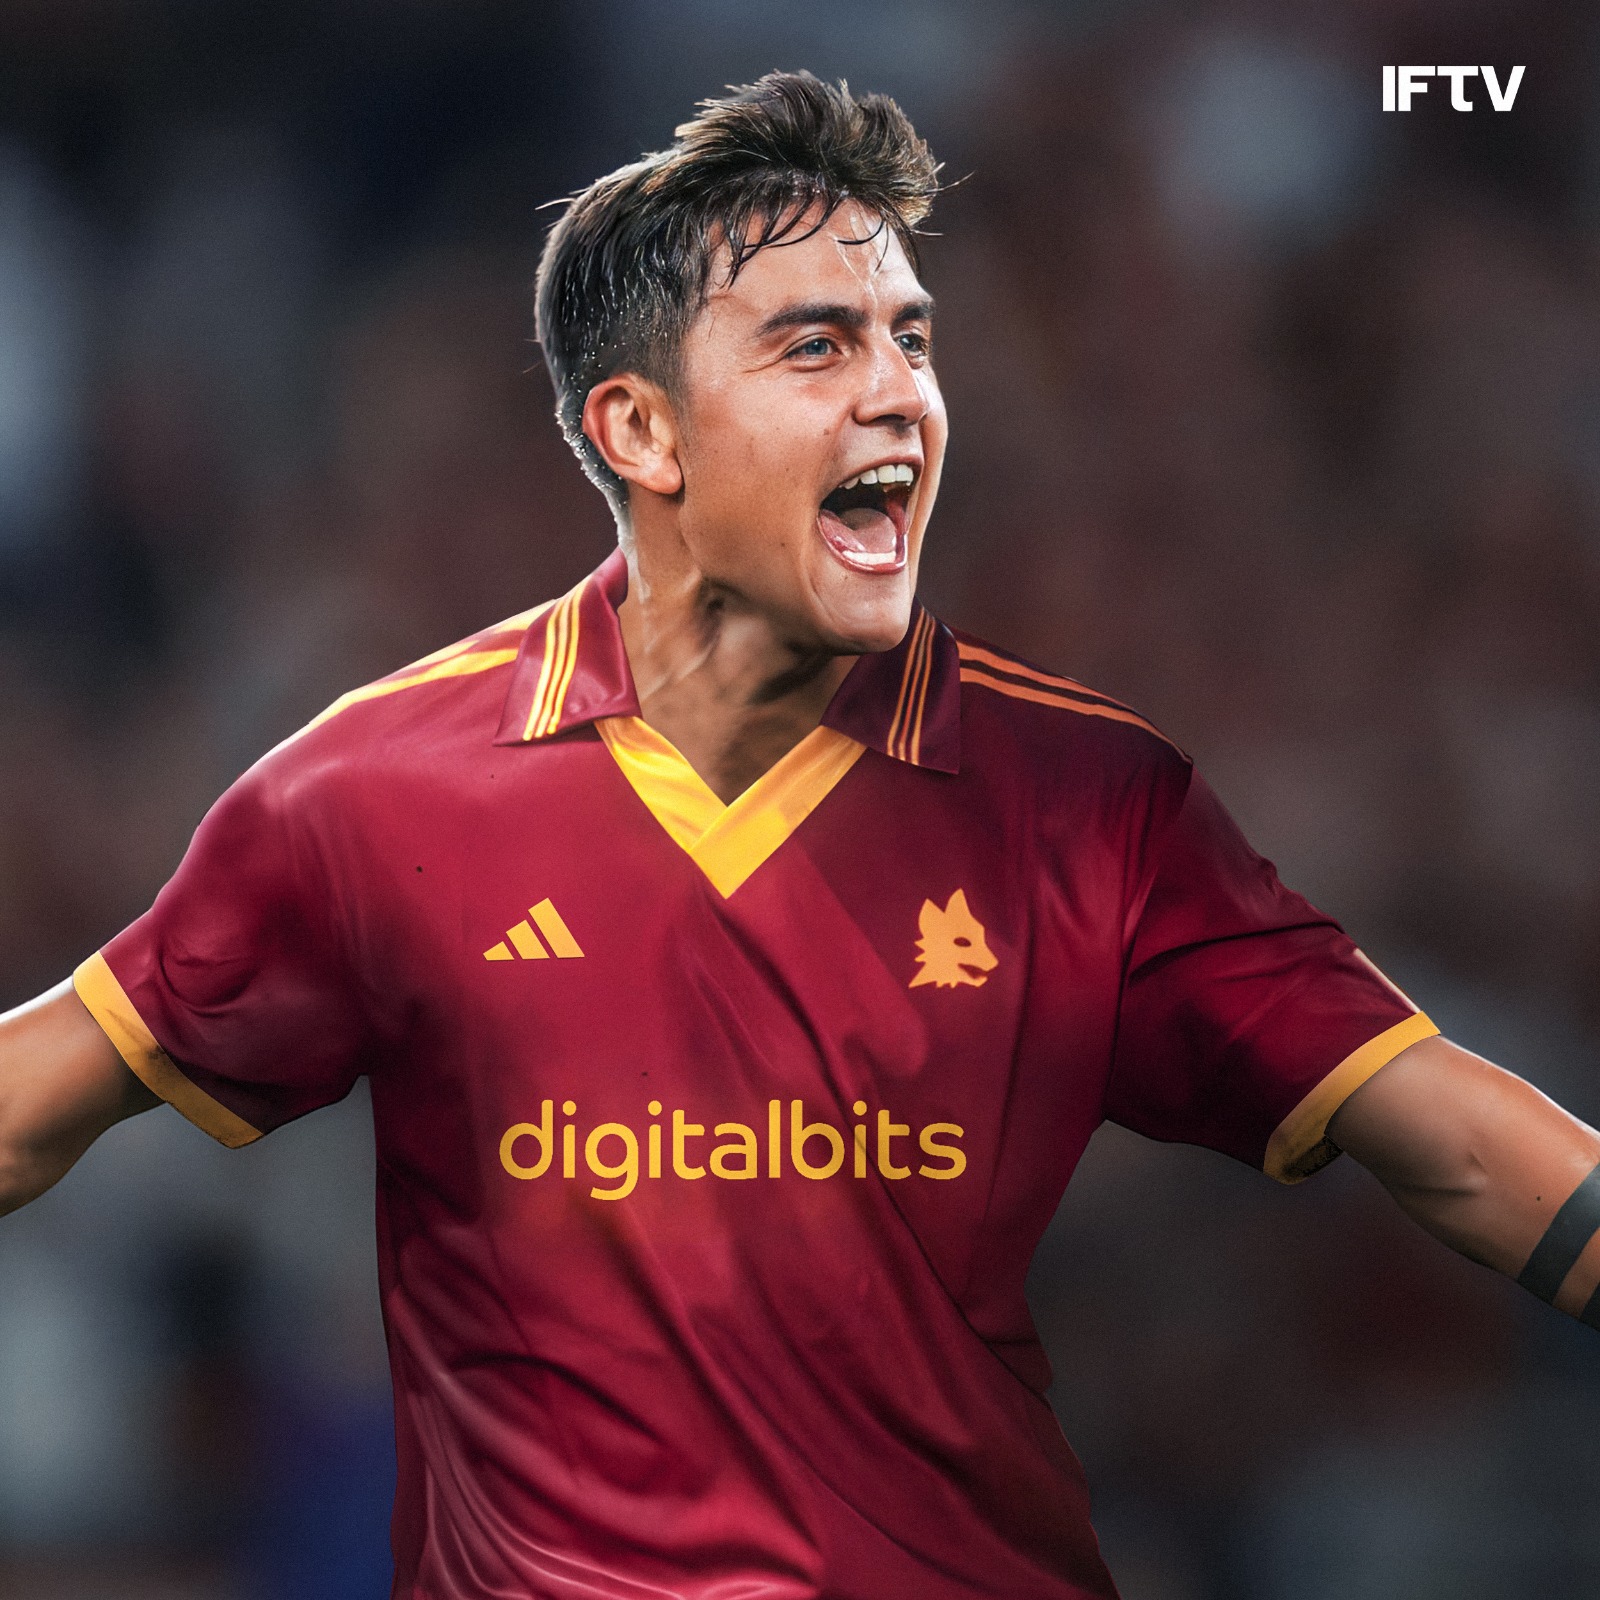 Italian Football TV on Twitter: "Roma are switching back to Adidas next season and to Filippo Biafora, their first kit with The Three Stripes could be inspired by their 93/94 kit.